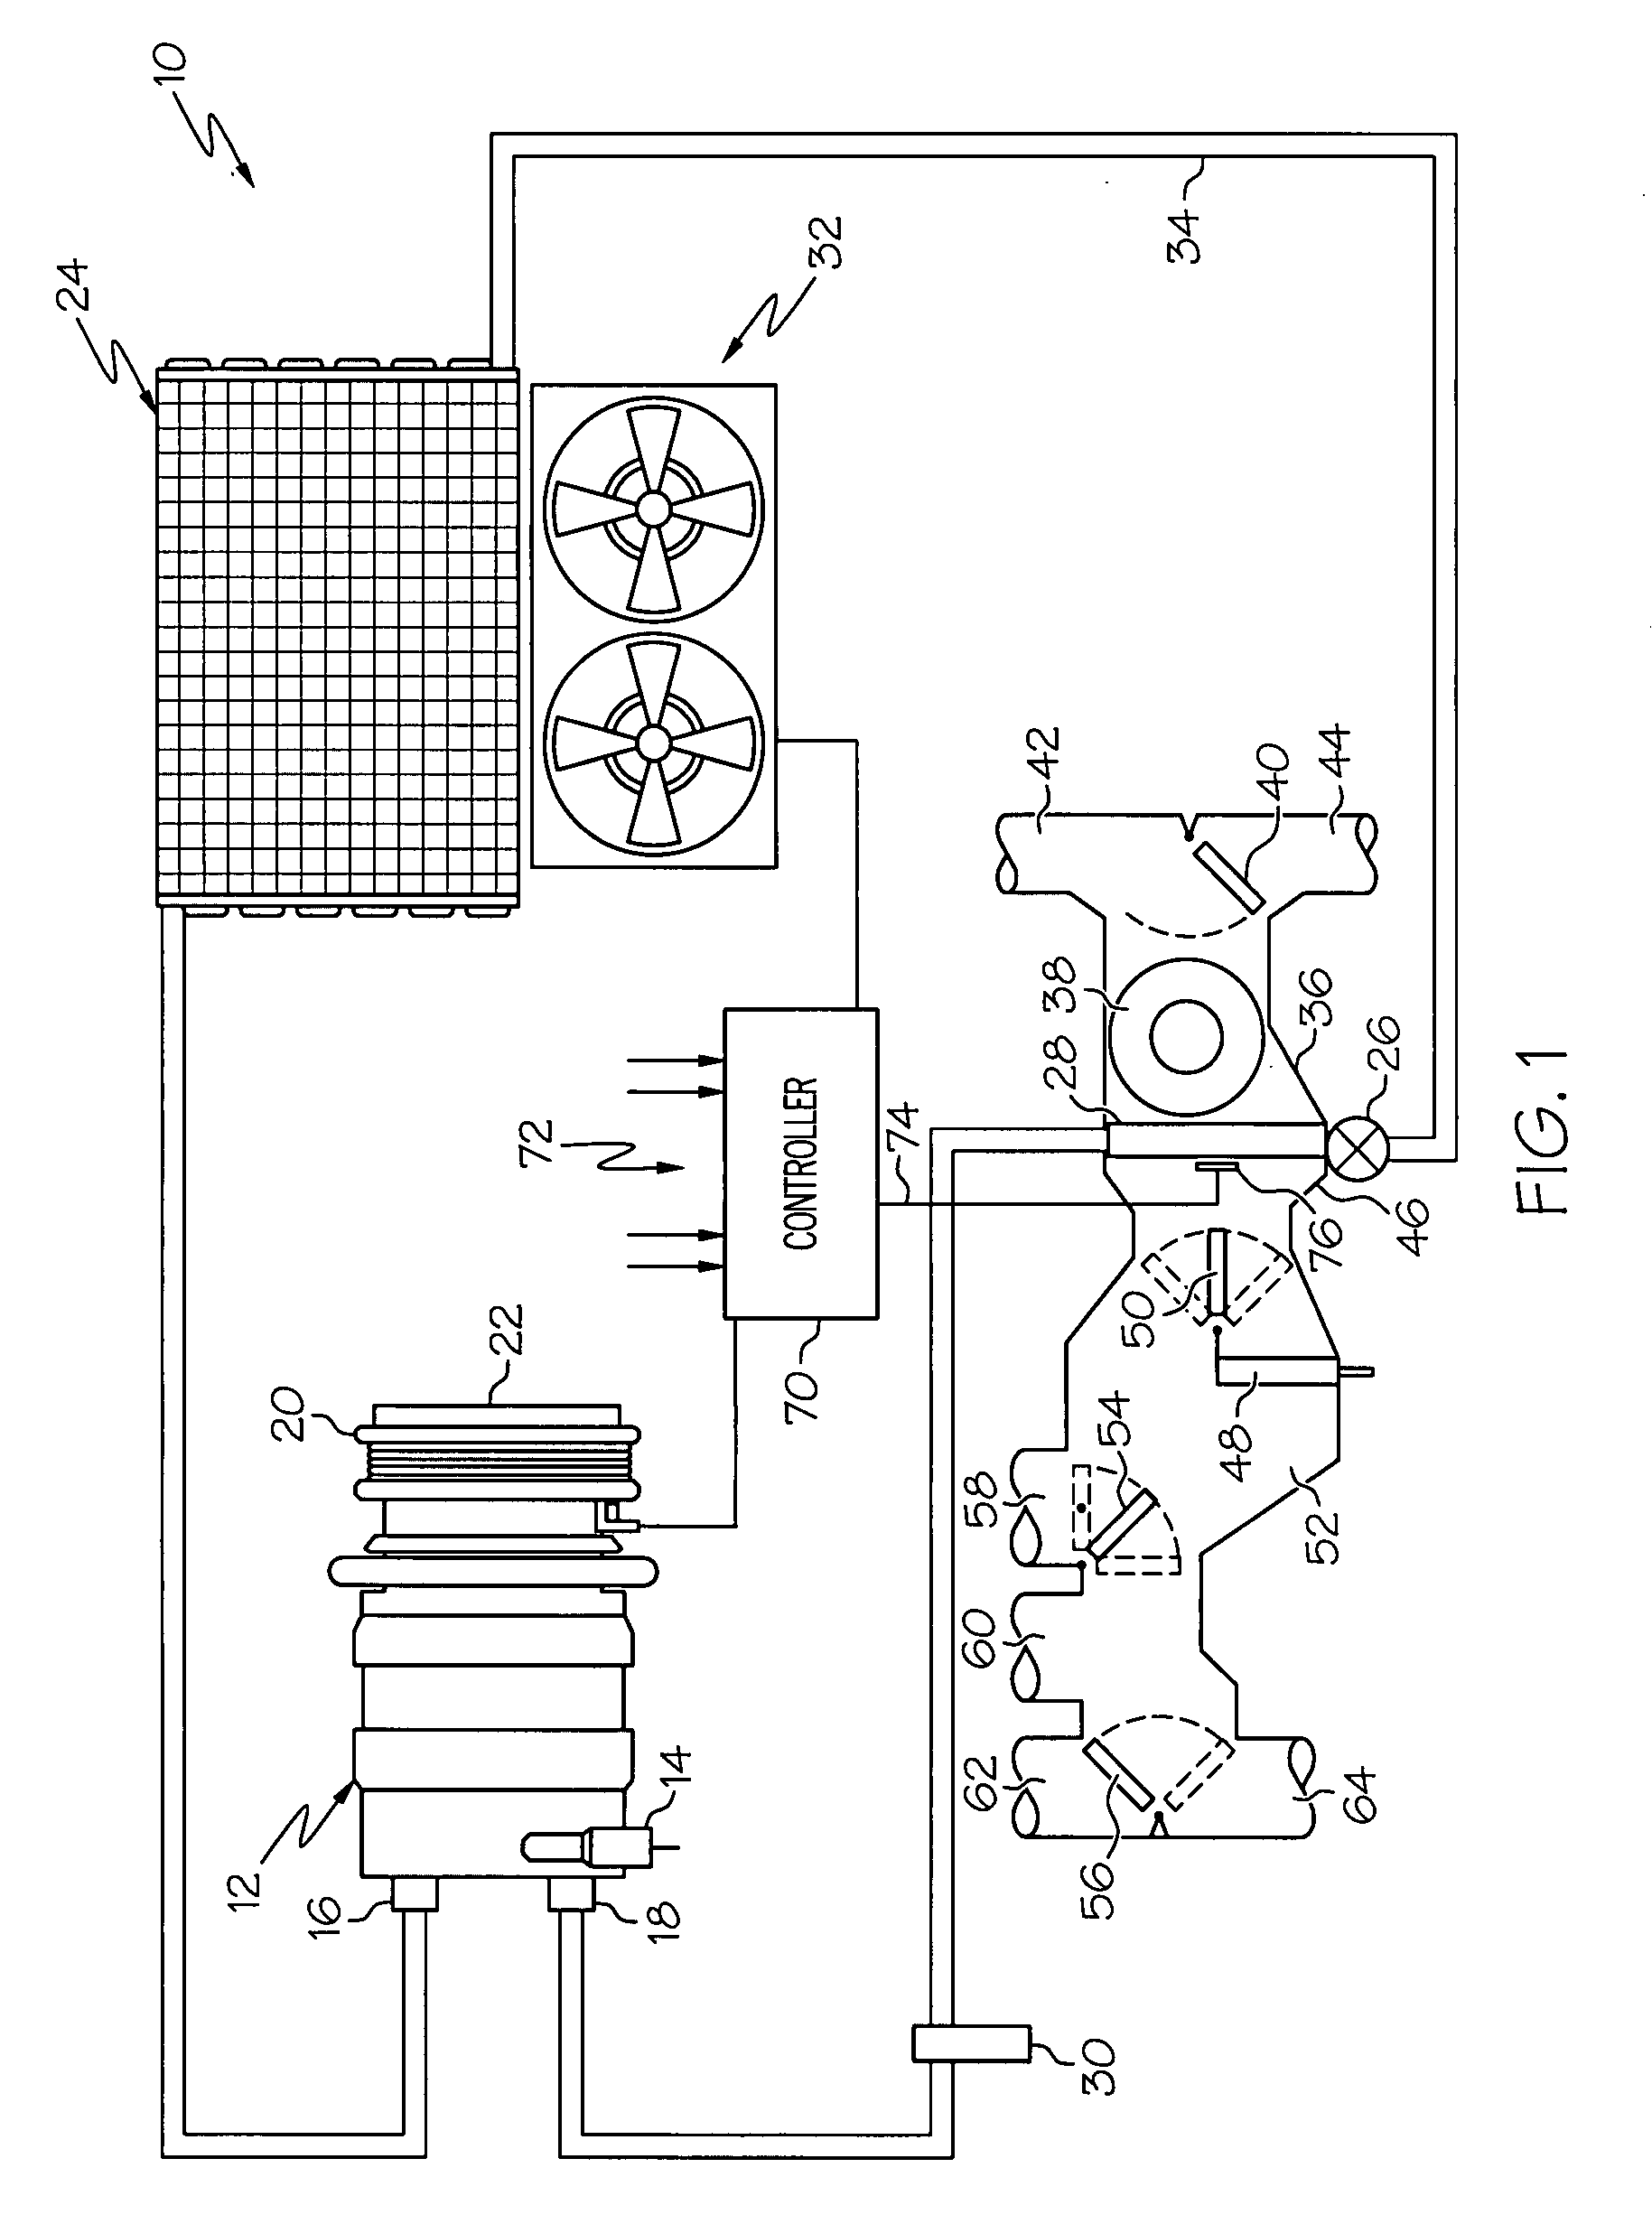 Control method for a variable displacement refrigerant compressor in a high-efficiency AC system